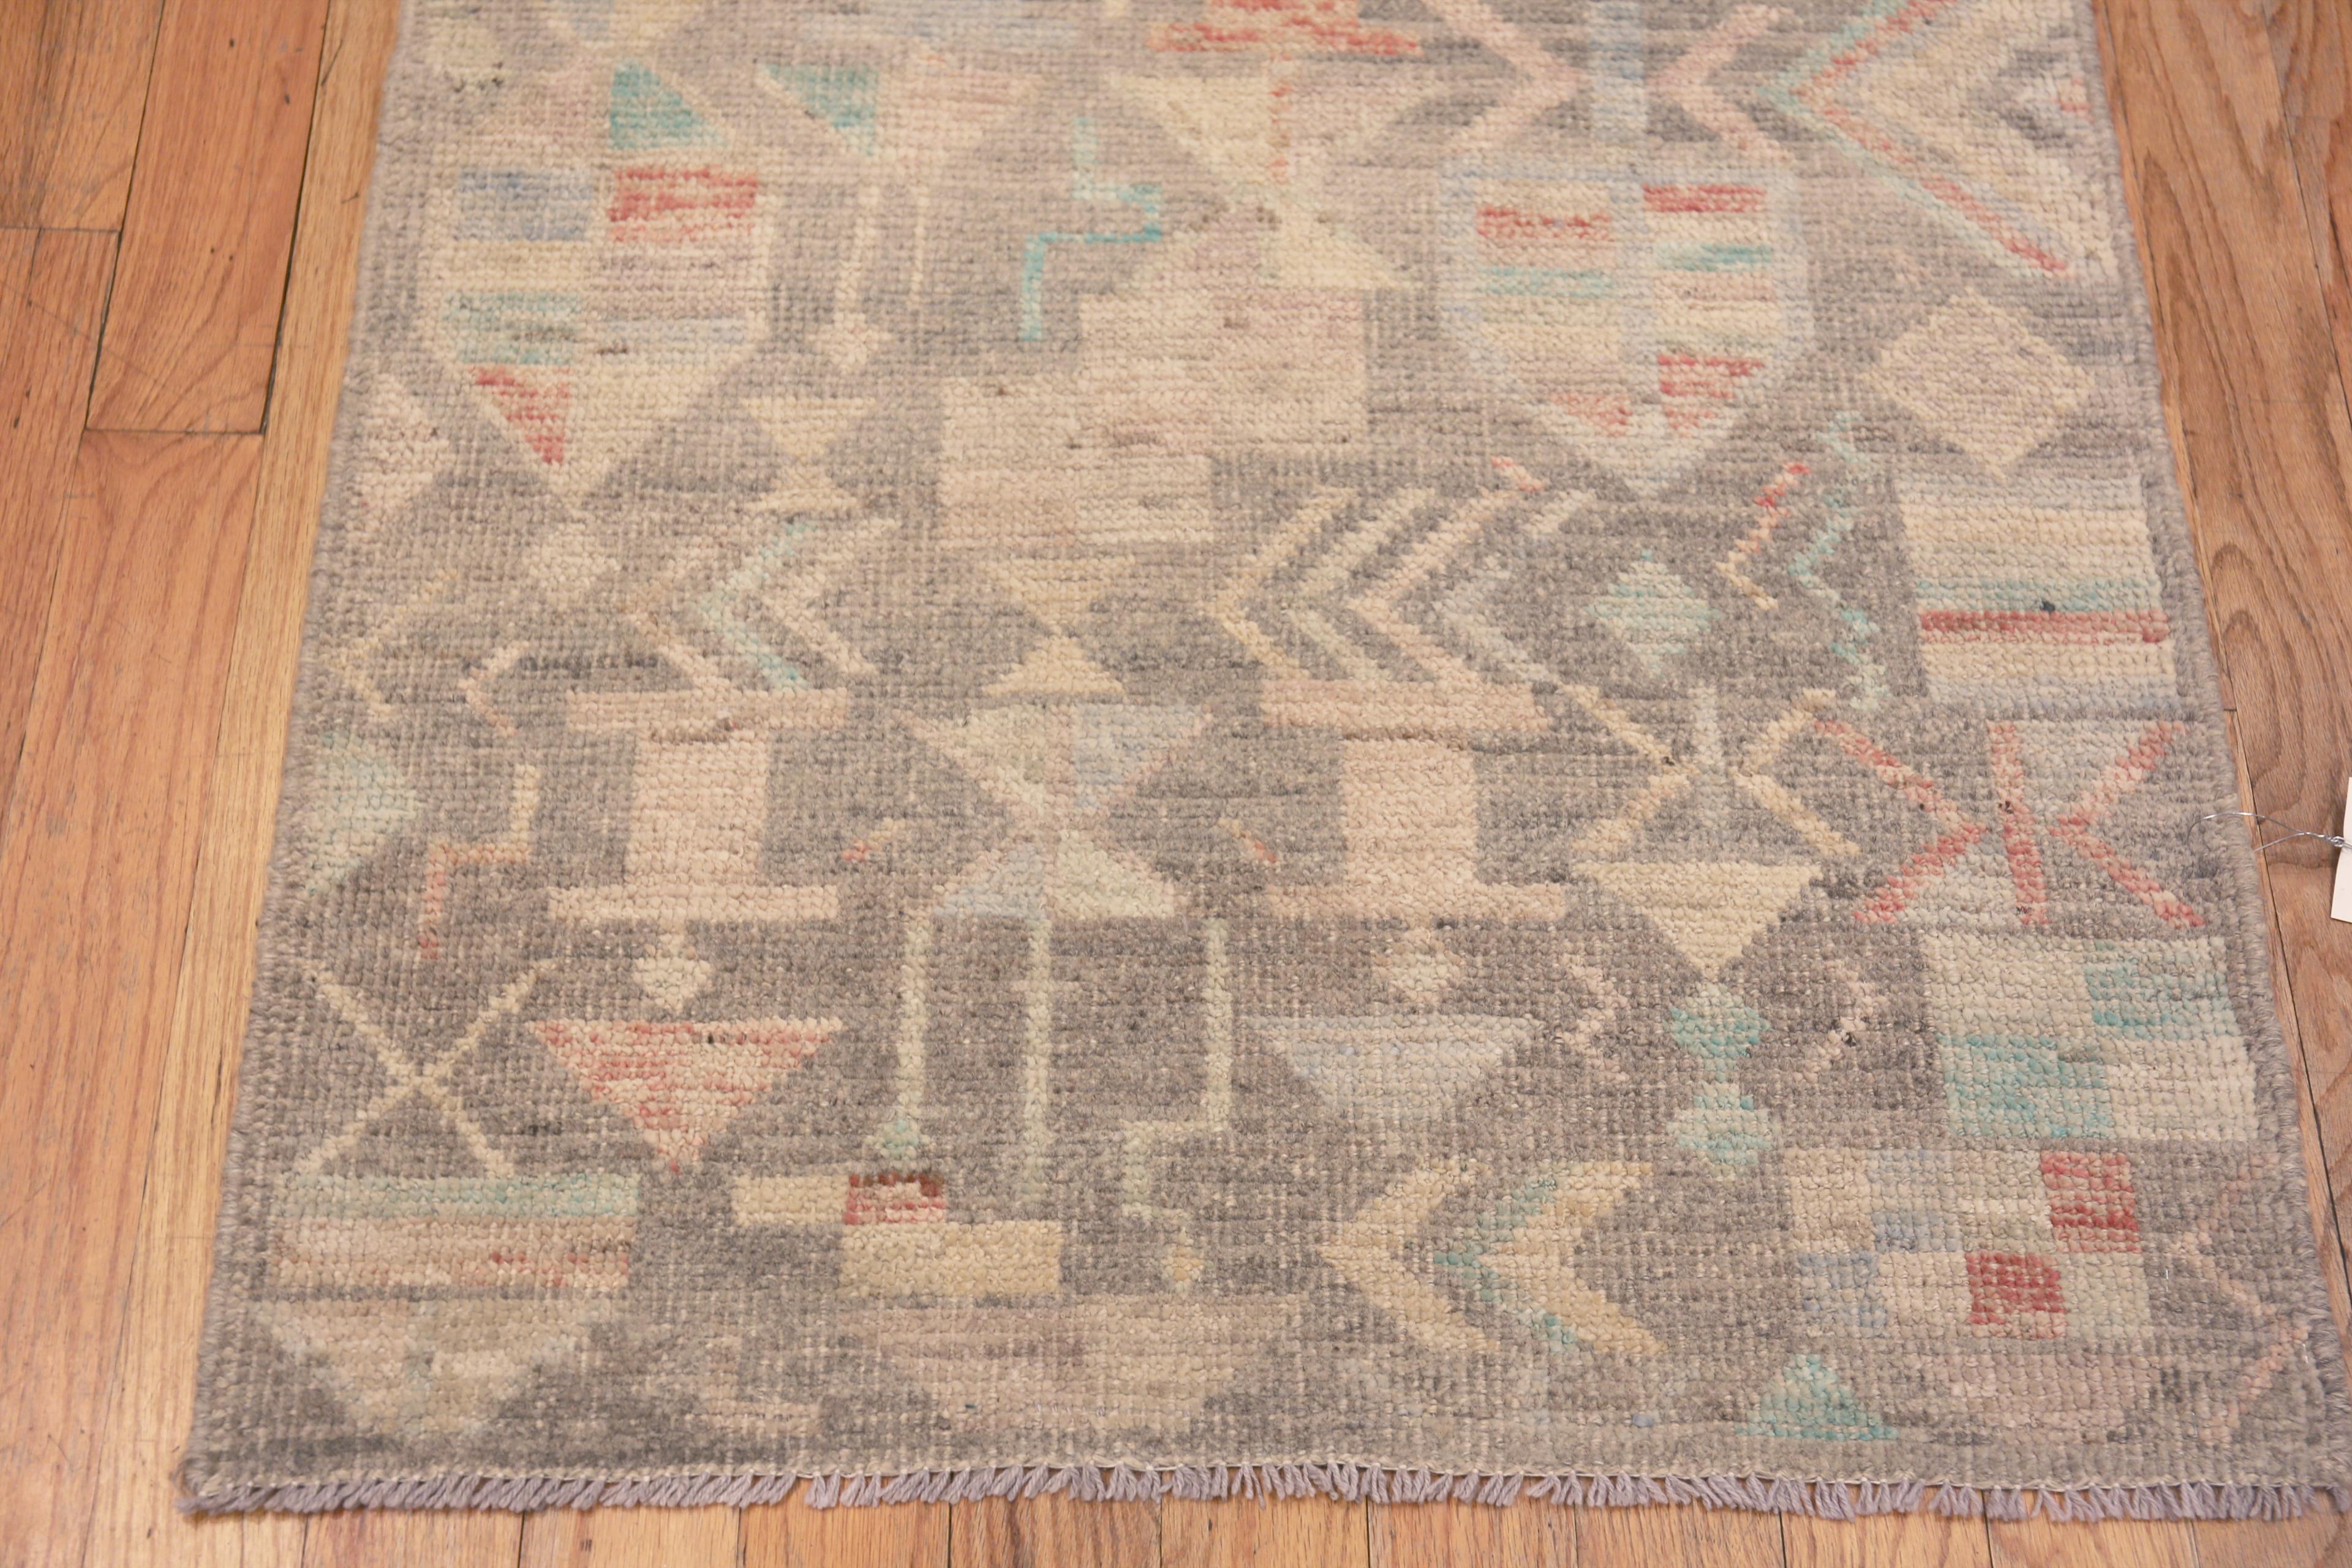 Contemporary Nazmiyal Collection Tribal Primitive Geometric Modern Runner Rug 2'10